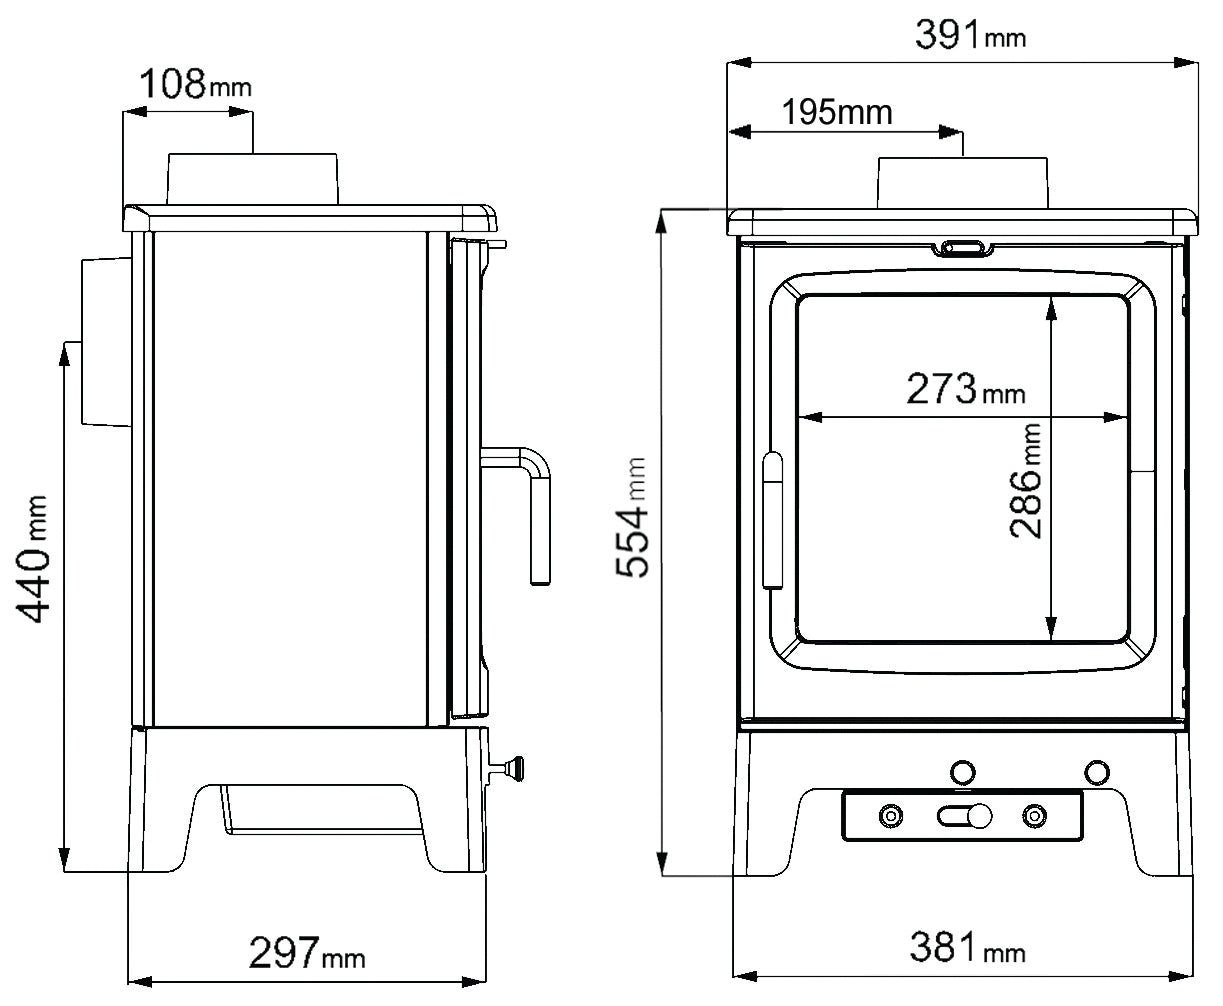 Dimensions and specifications for Saltfire  Peanut 5 woodburning stove.